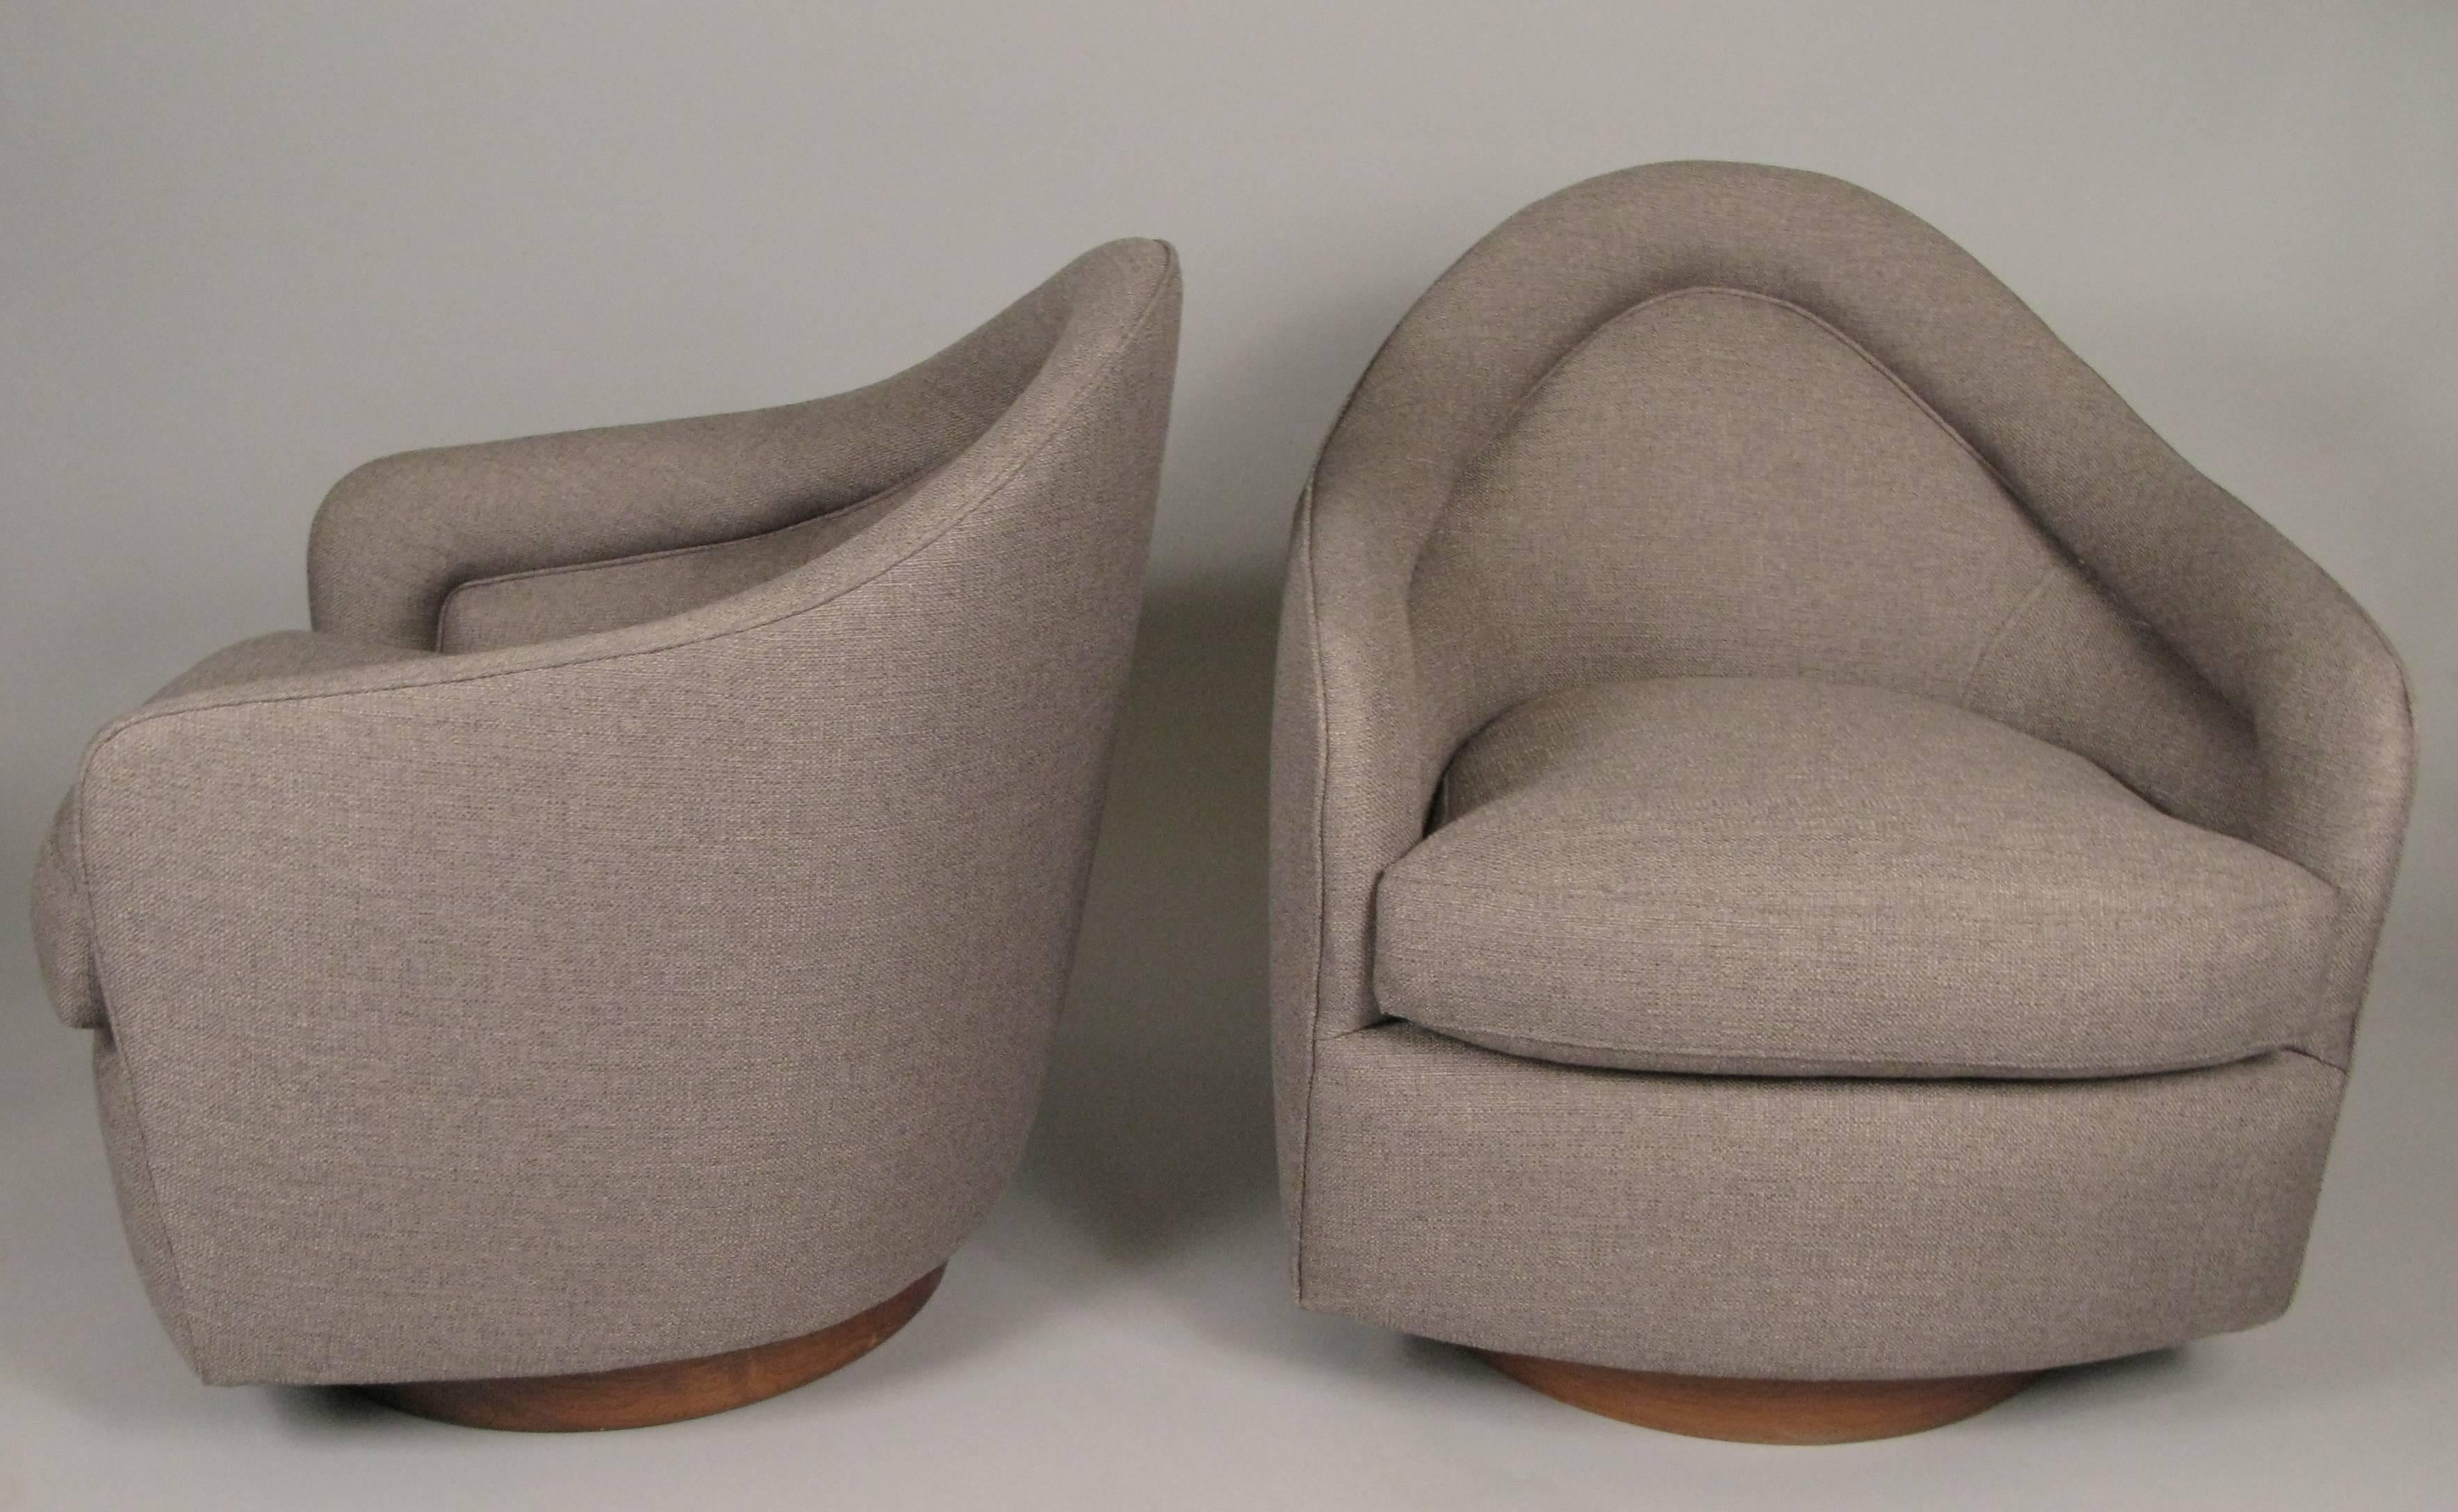 One of the most comfortable modern lounge chairs from the 1960s, this swivel and tilt lounge chair designed by Milo Baughman for Thayer Coggin is a Classic. The pair is raised on walnut round bases, and the chairs have been reupholstered beautifully